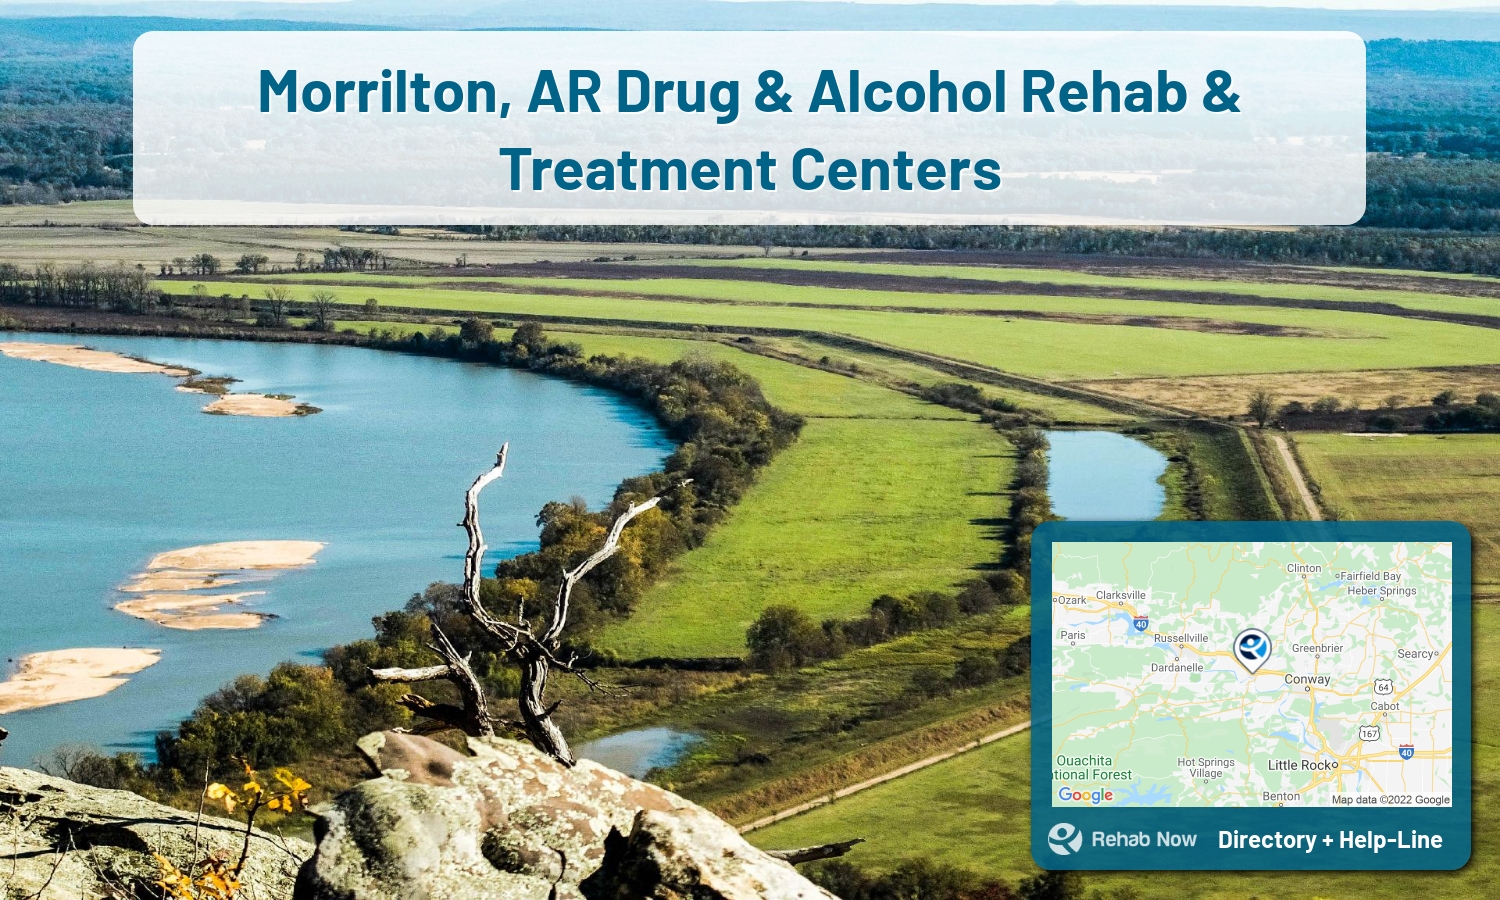 Our experts can help you find treatment now in Morrilton, Arkansas. We list drug rehab and alcohol centers in Arkansas.